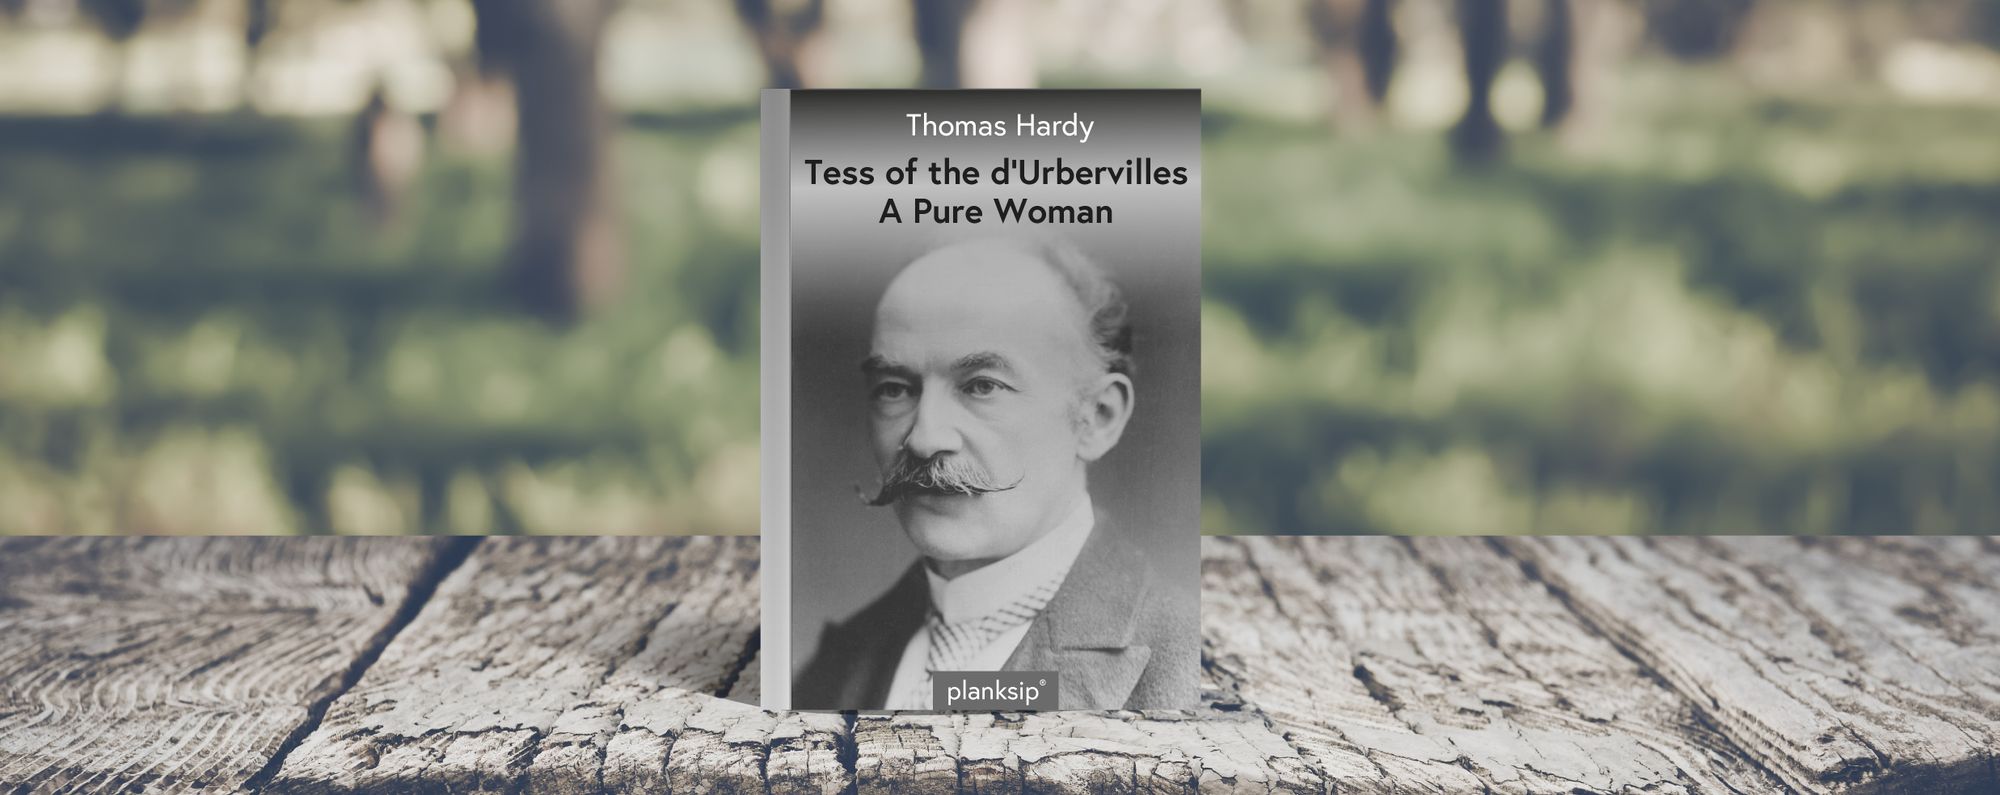 https://www.planksip.org/content/images/2021/08/585260_Thomas-Hardy_Tess-of-the-d-Urbervilles_112219-1.jpg